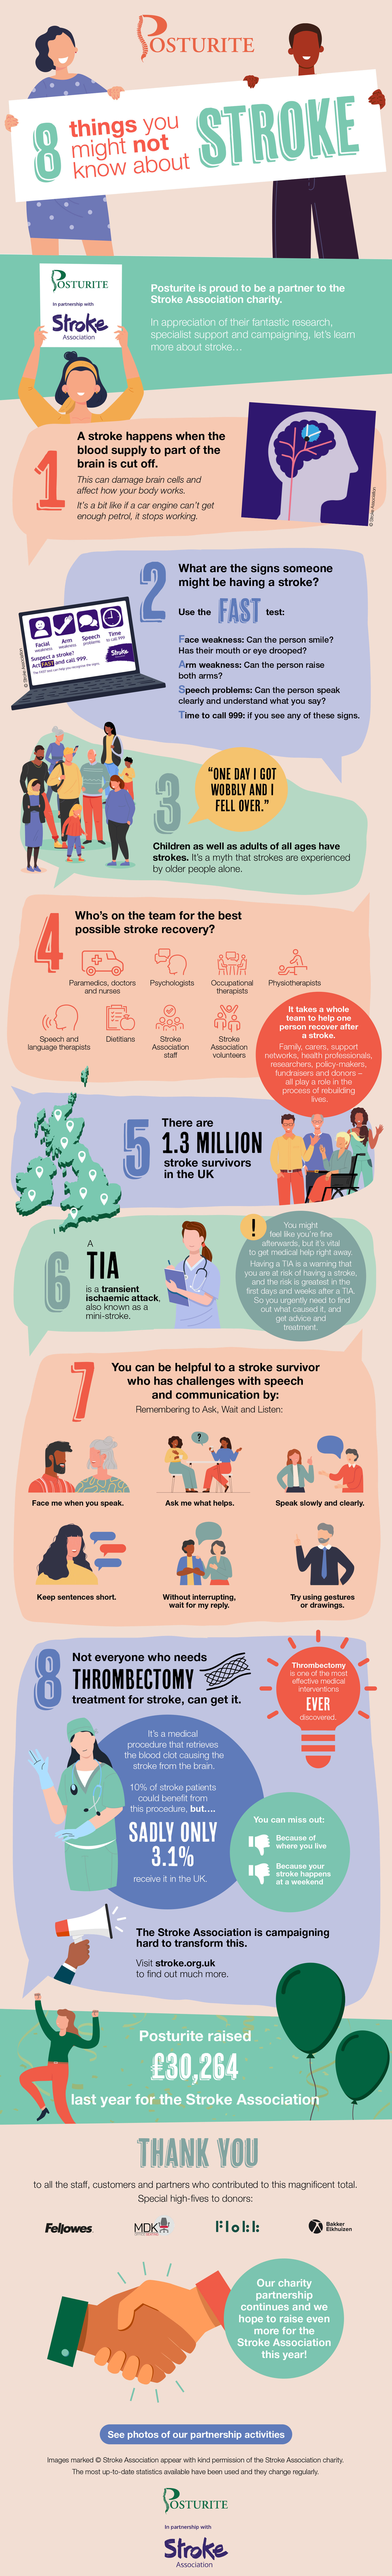 8 things you might not know about stroke